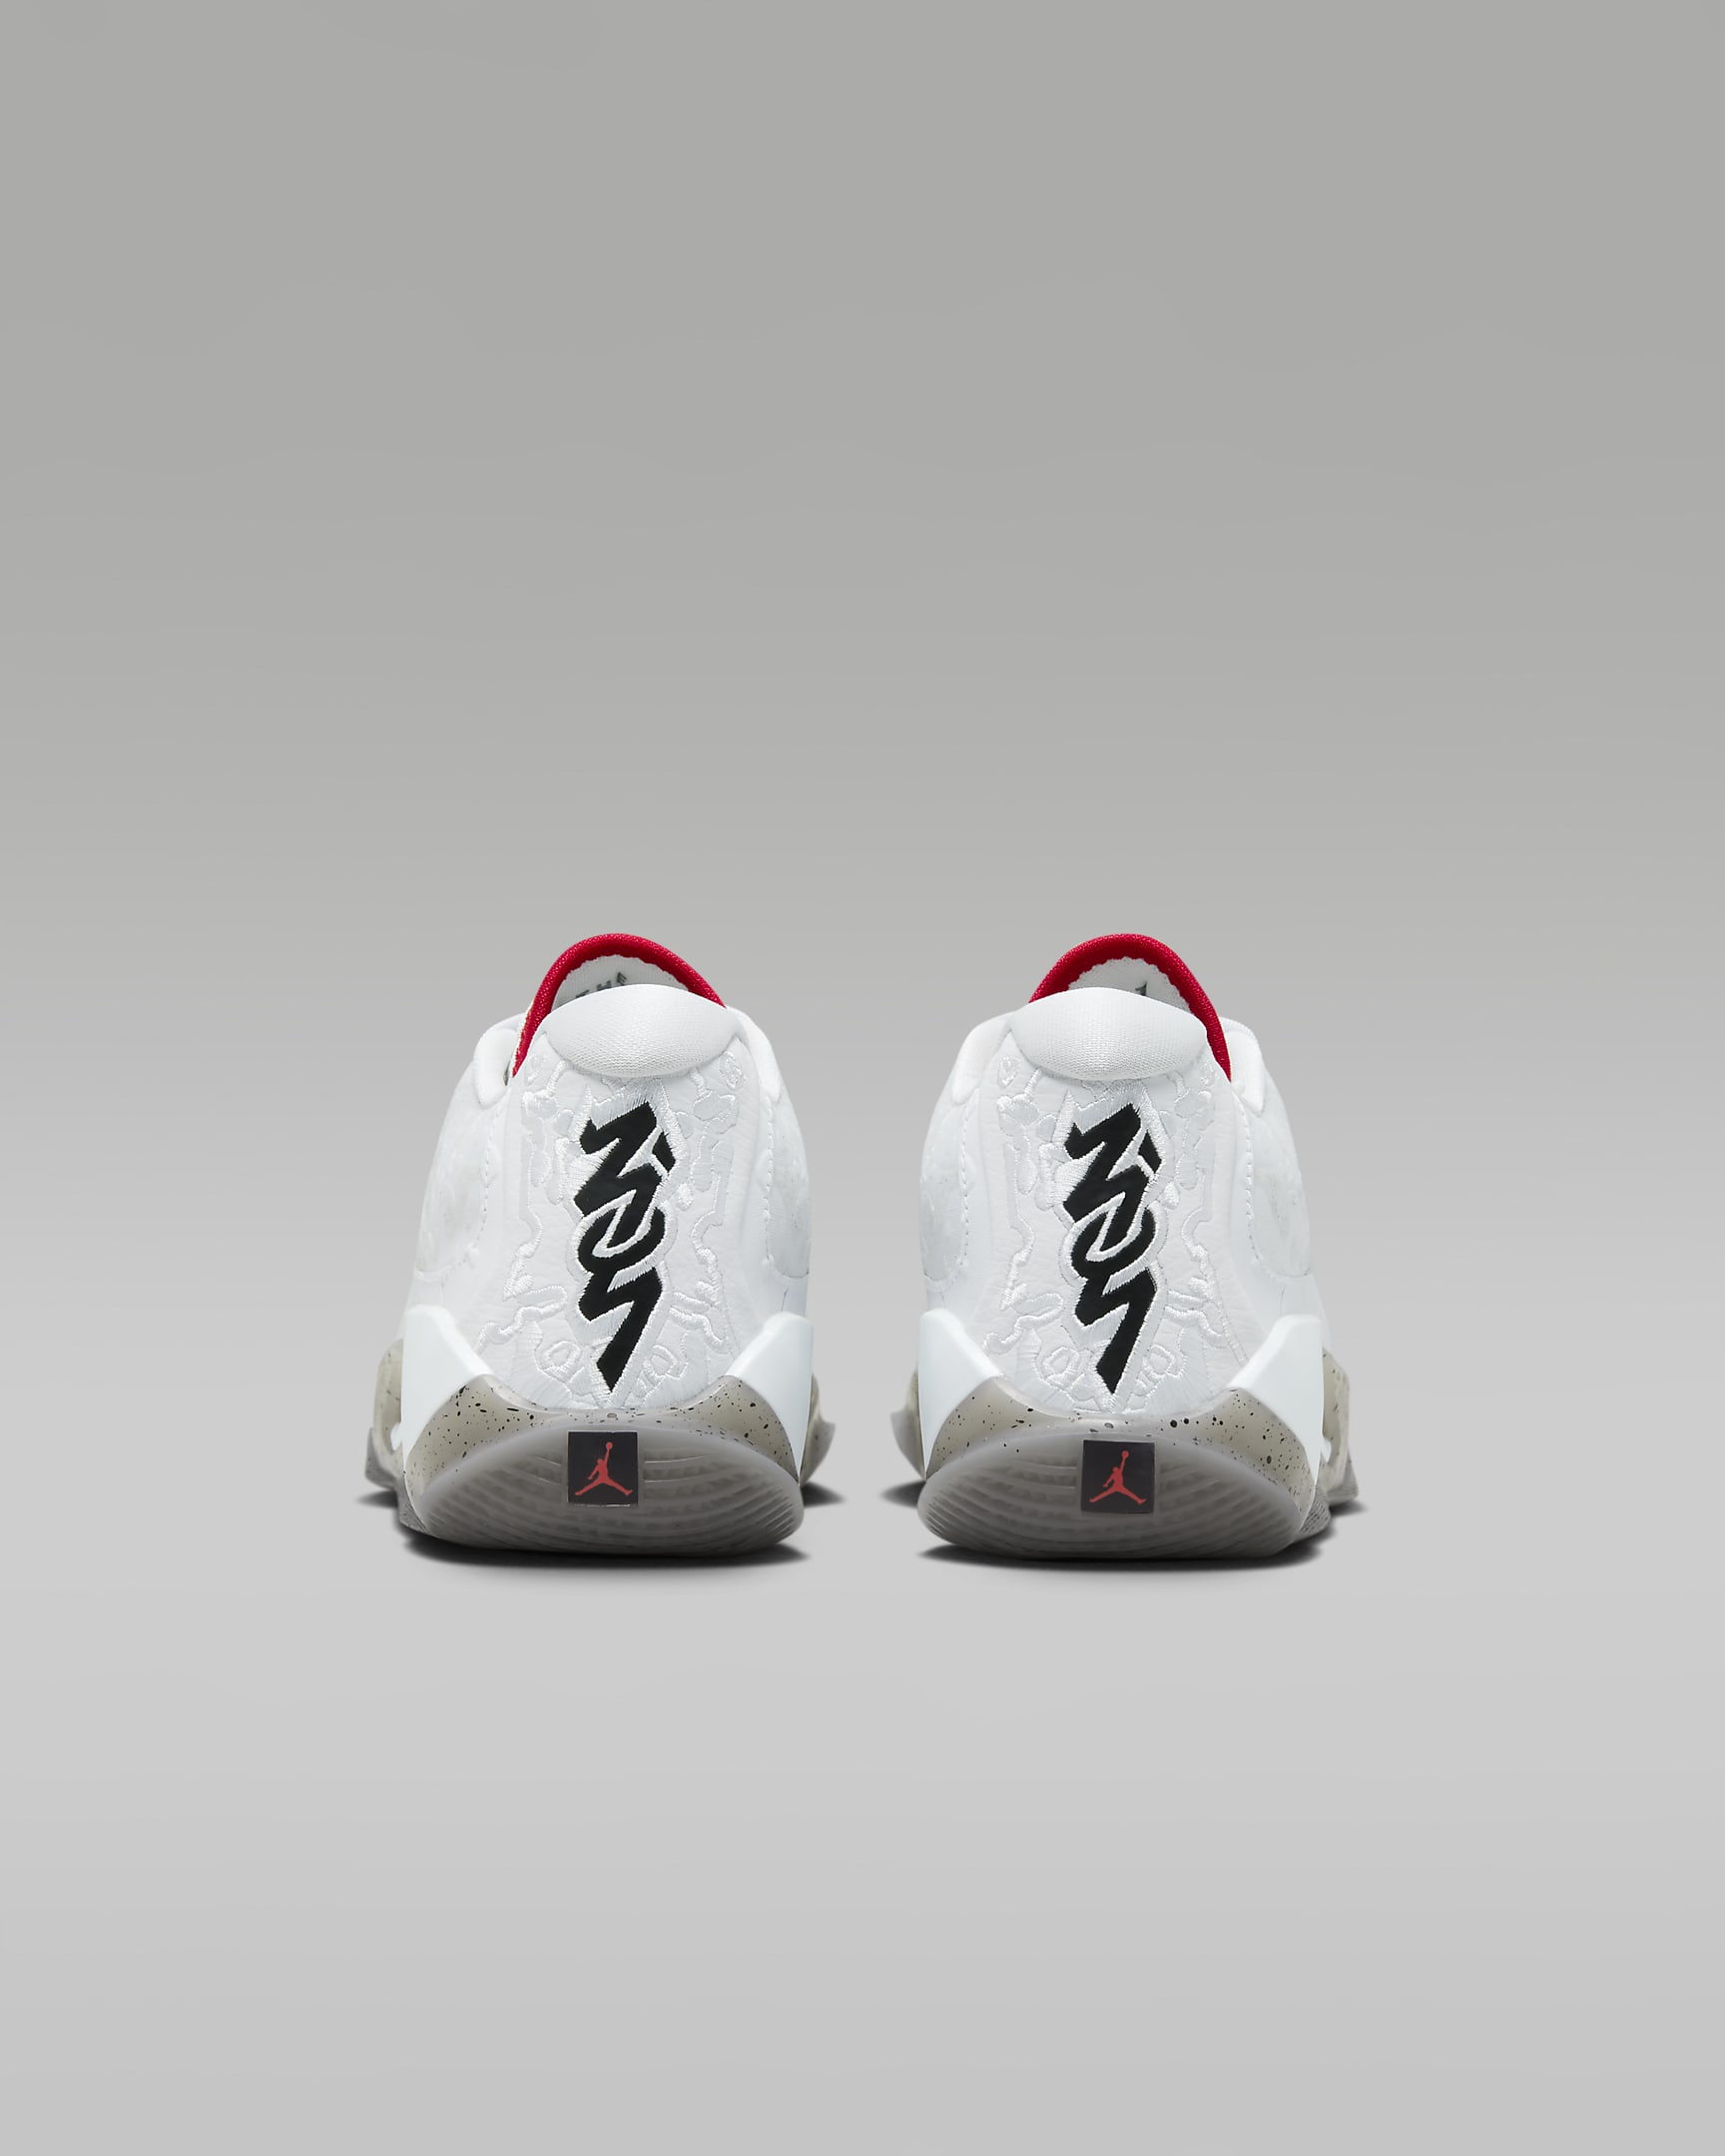 Zion 3 'Fresh Paint' Older Kids' Basketball Shoes - White/Cement Grey/Pure Platinum/University Red